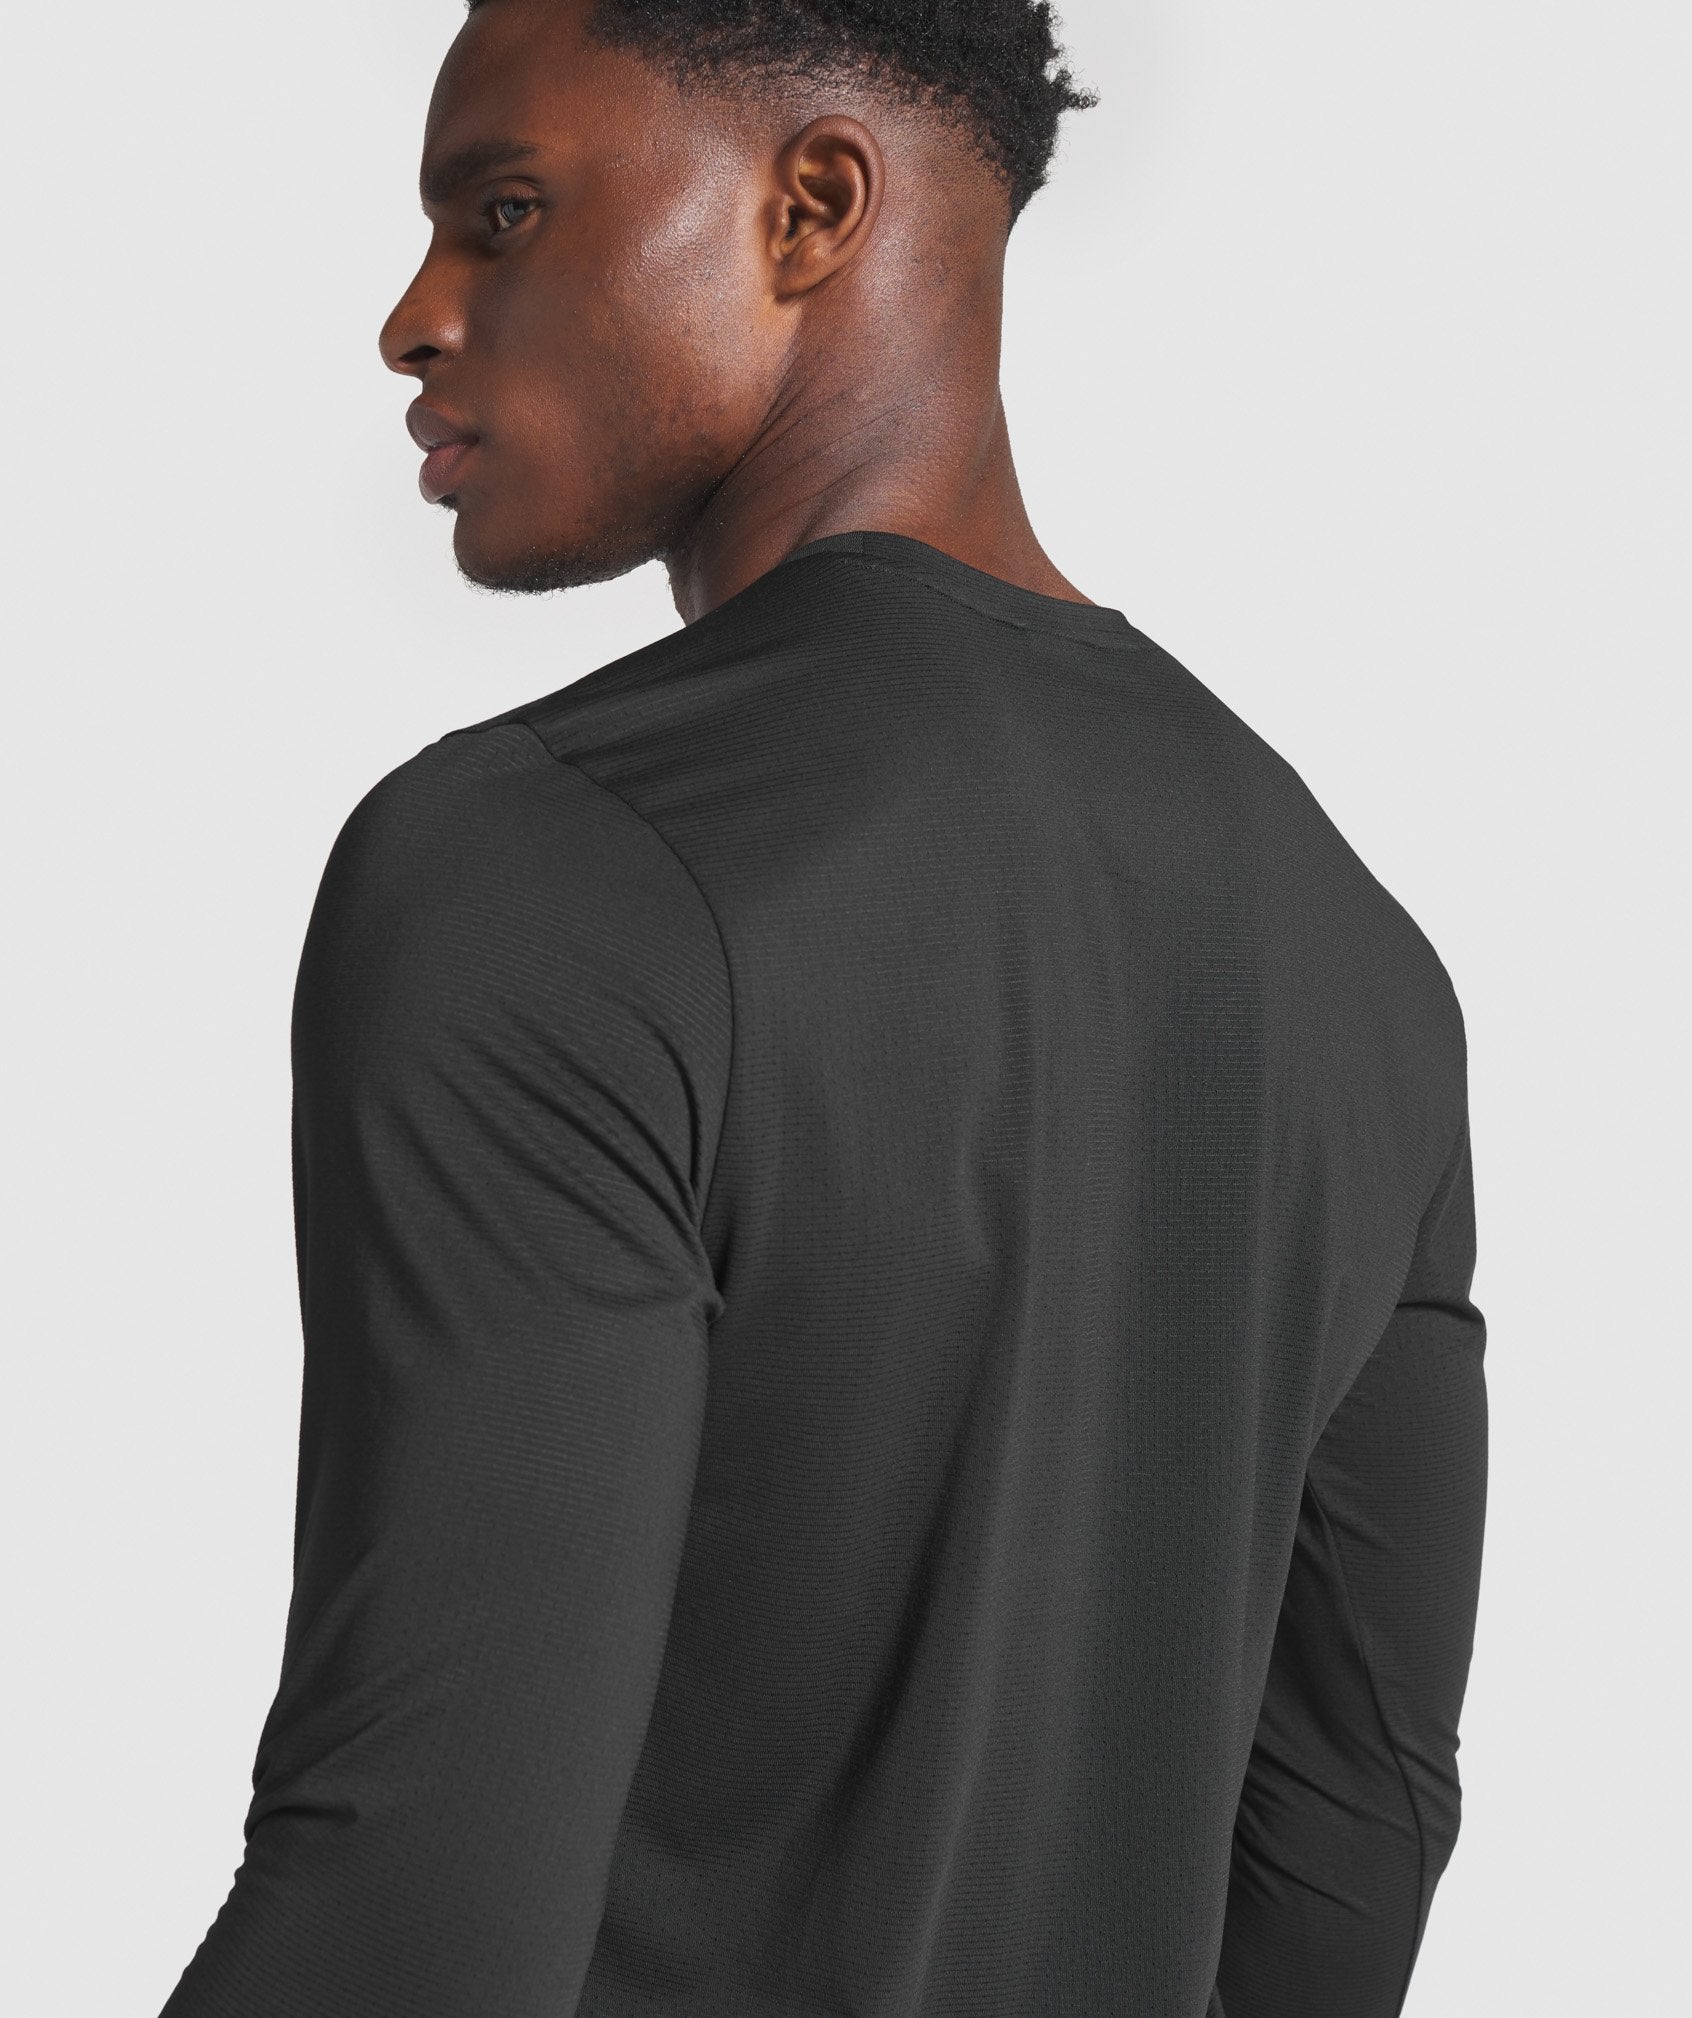 Arrival Long Sleeve Graphic T-Shirt in Black